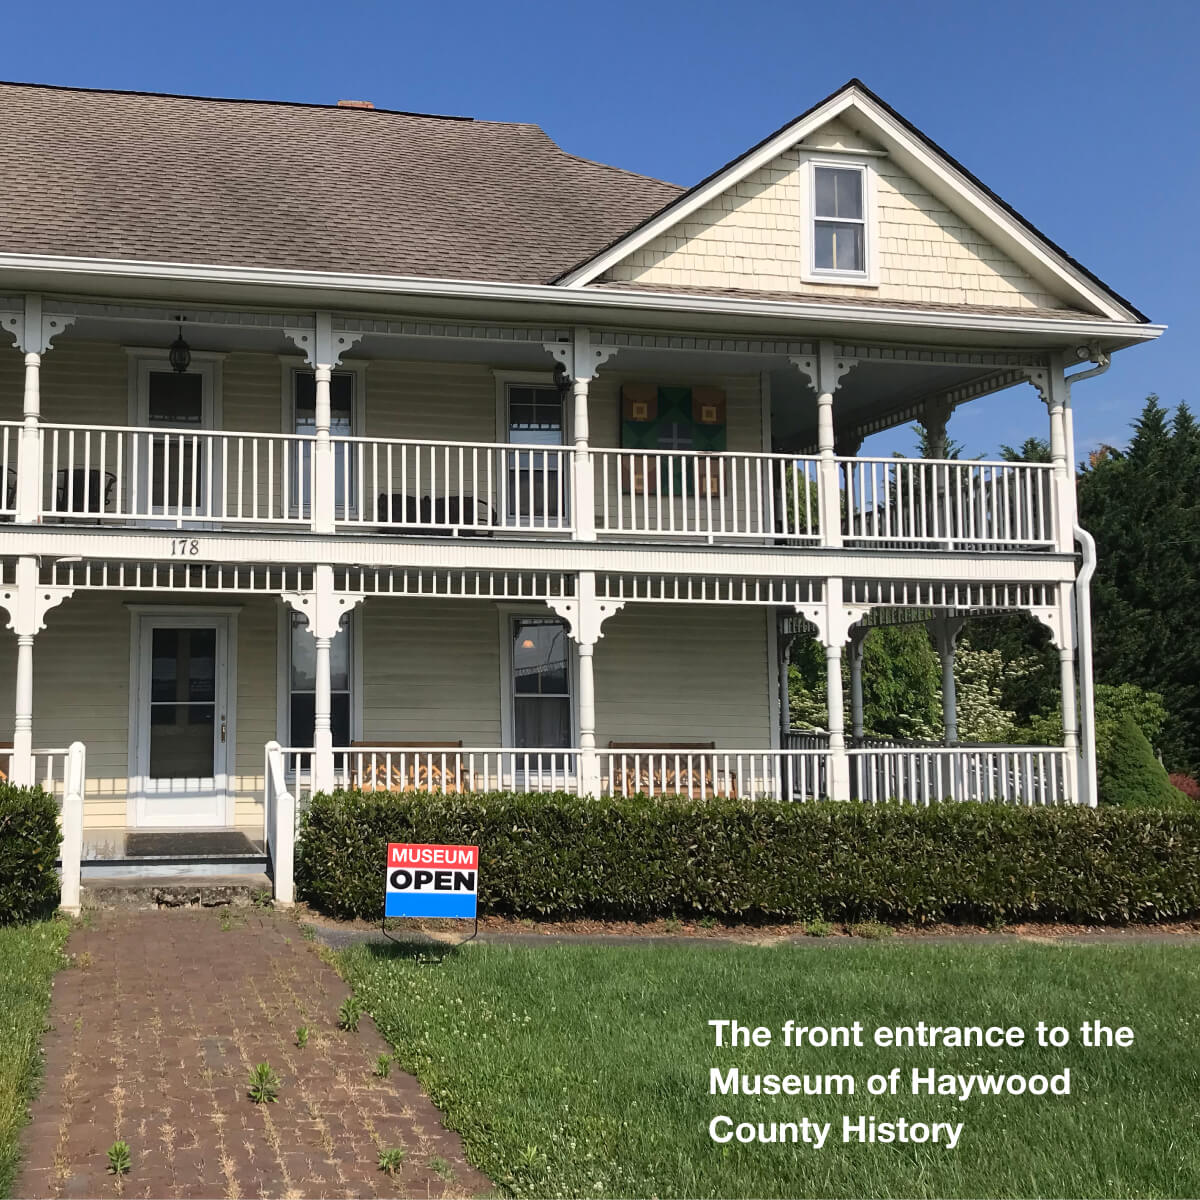 Photo of the front of the Museum of Haywood County History, which is a white two story house with wrap-around porch